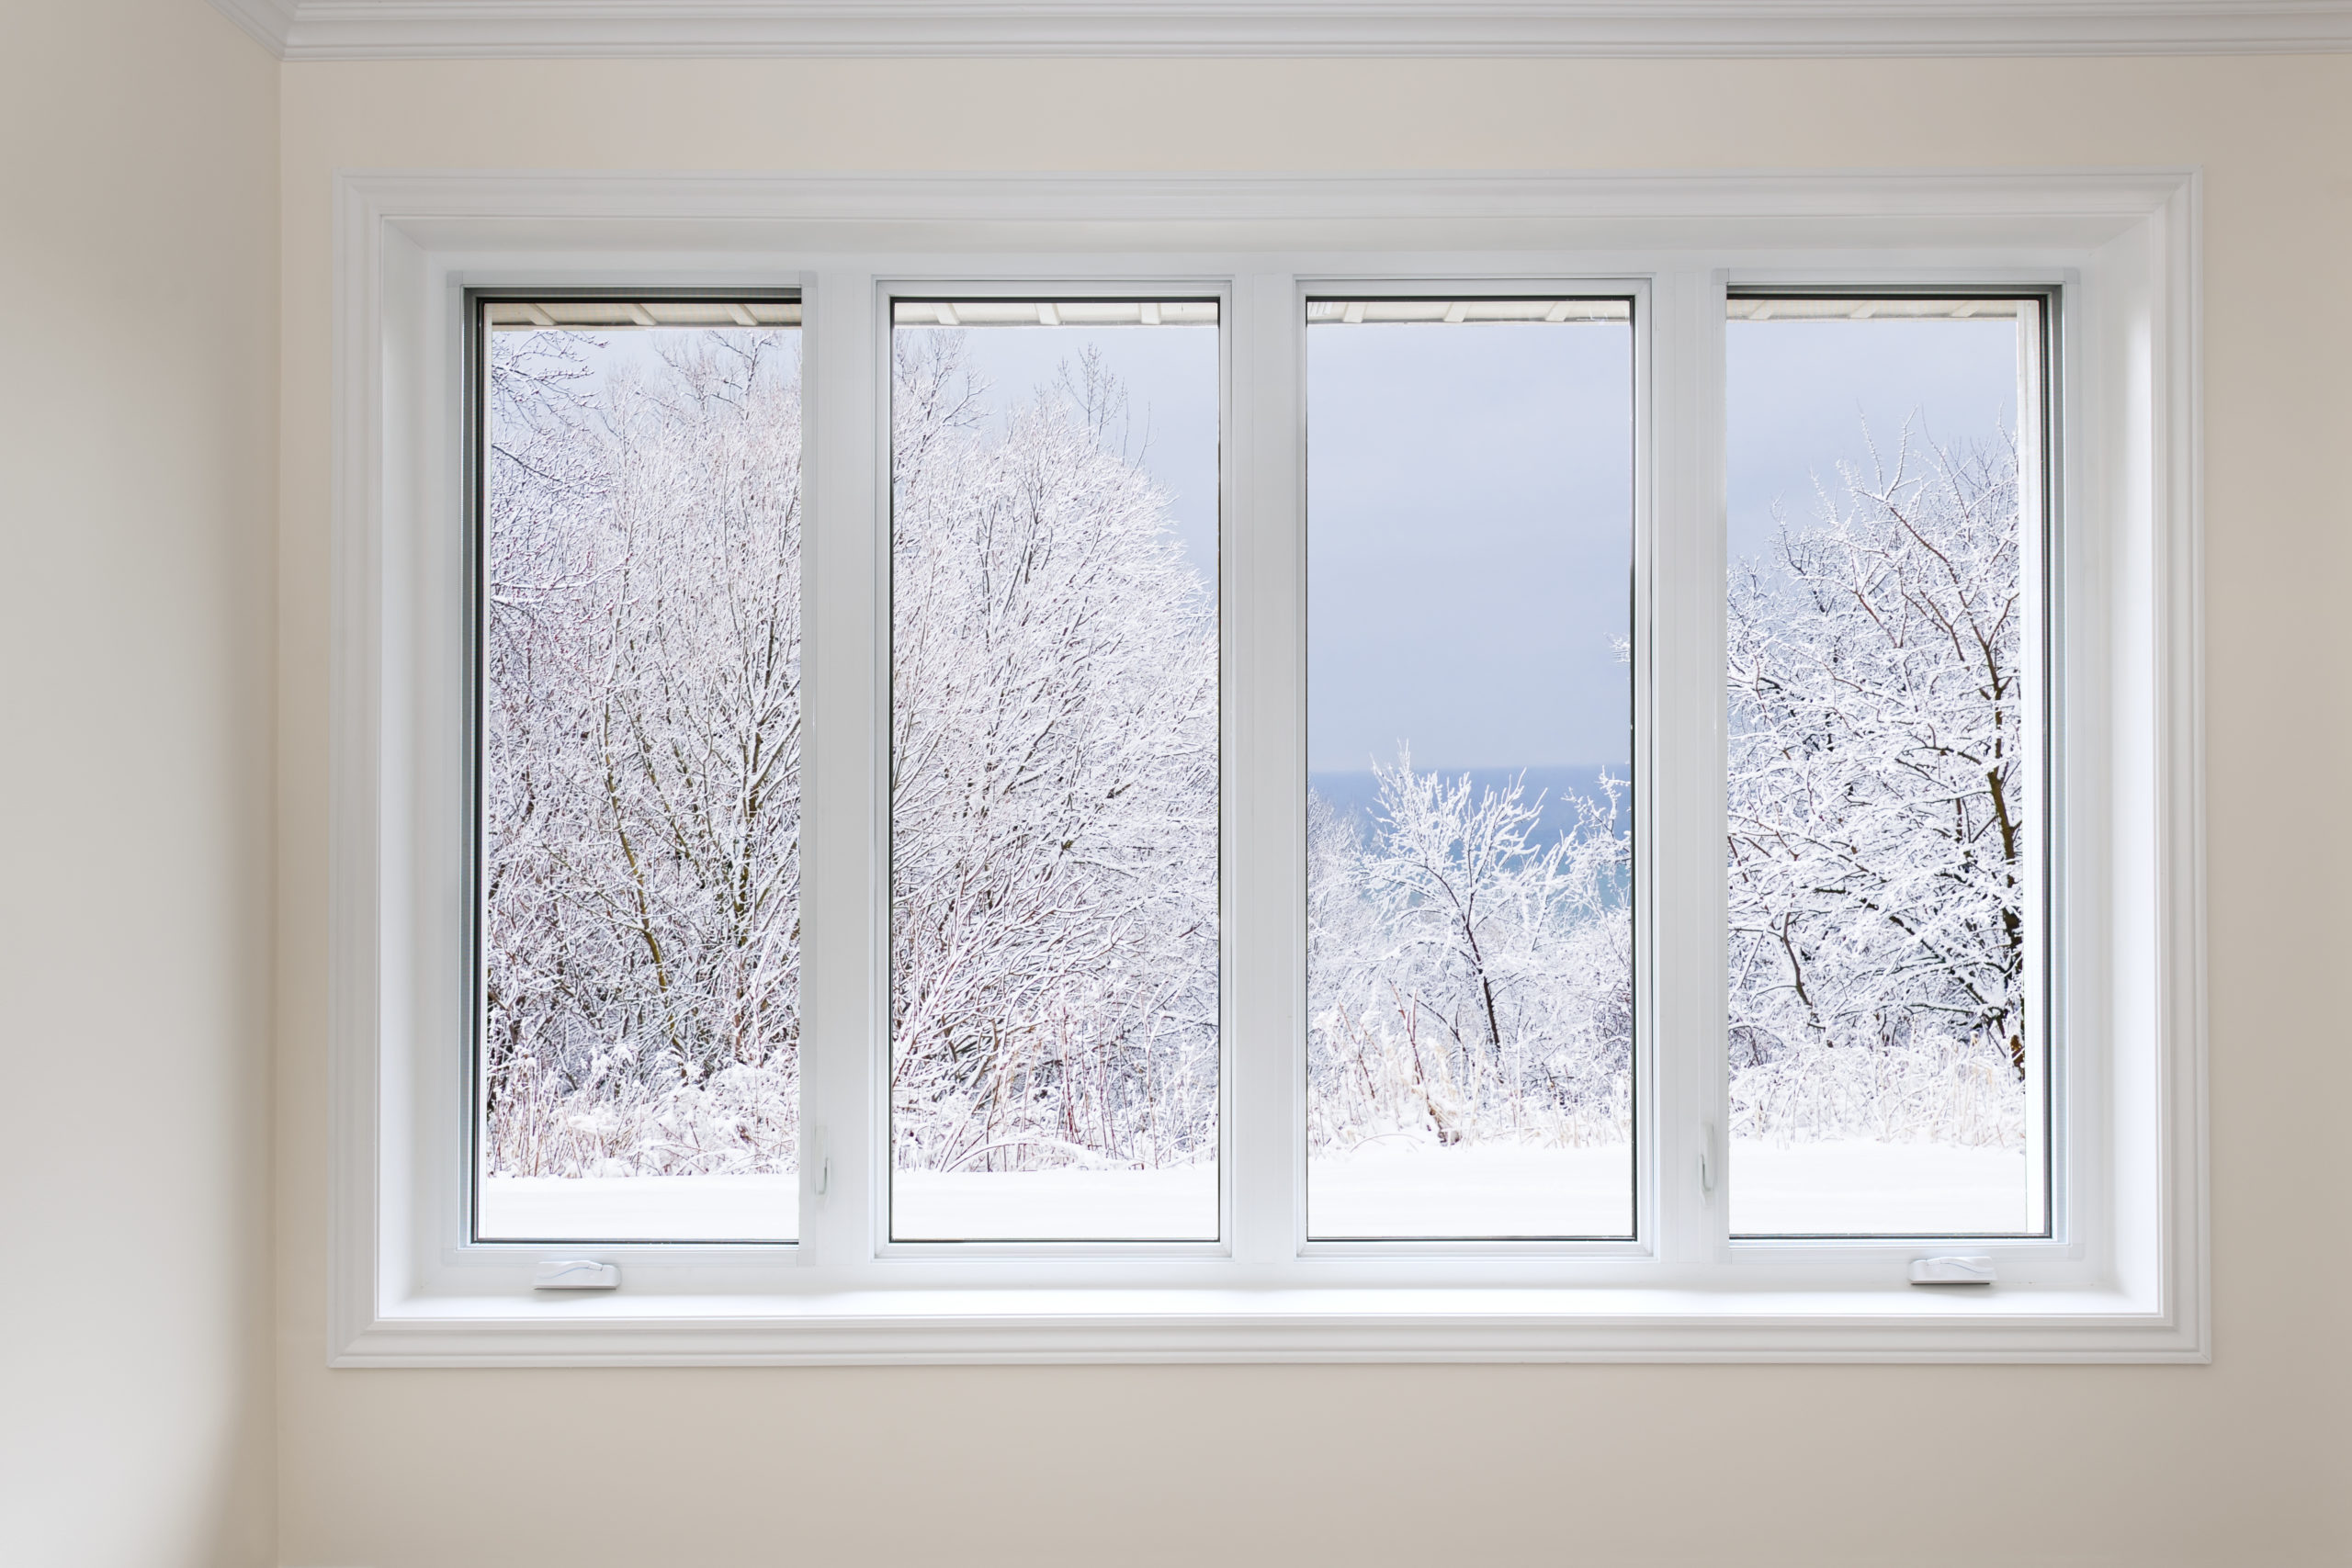 Large window with four panes looking out onto snow covered trees